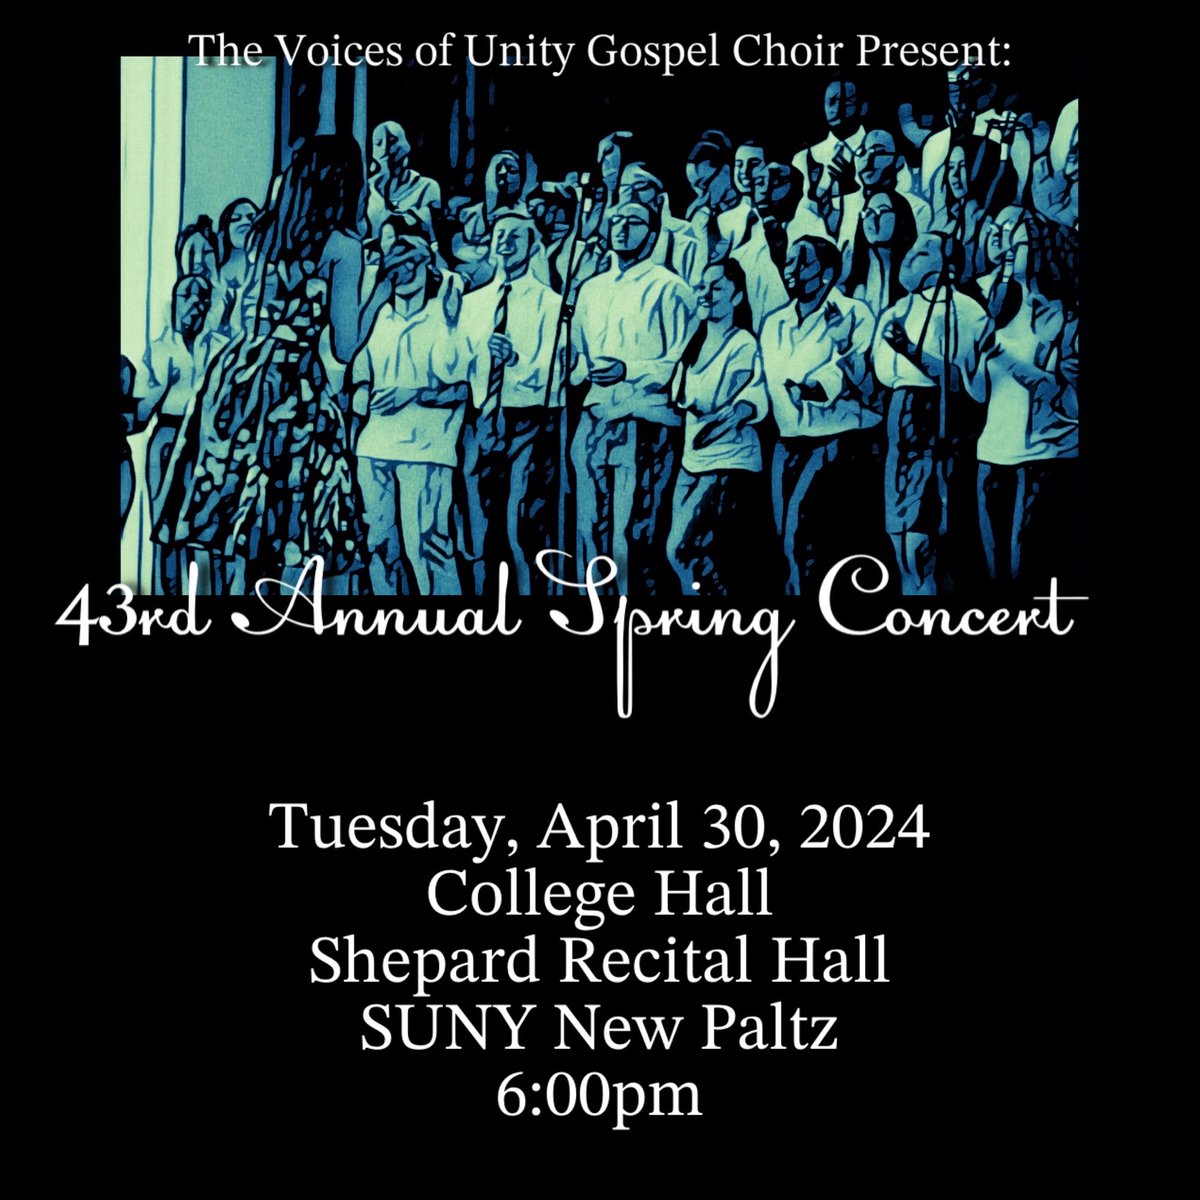 TONIGHT: The #BlackStudies Department at #SUNYNewPaltz cordially invites everyone to the 43rd Annual #VoicesofUnity Gospel Spring Concert!

In the Spirit of UMOJA, ​the show is open to all and starts at 6pm on April 30, 2024 at College Hall! 

#gospelspringconcert